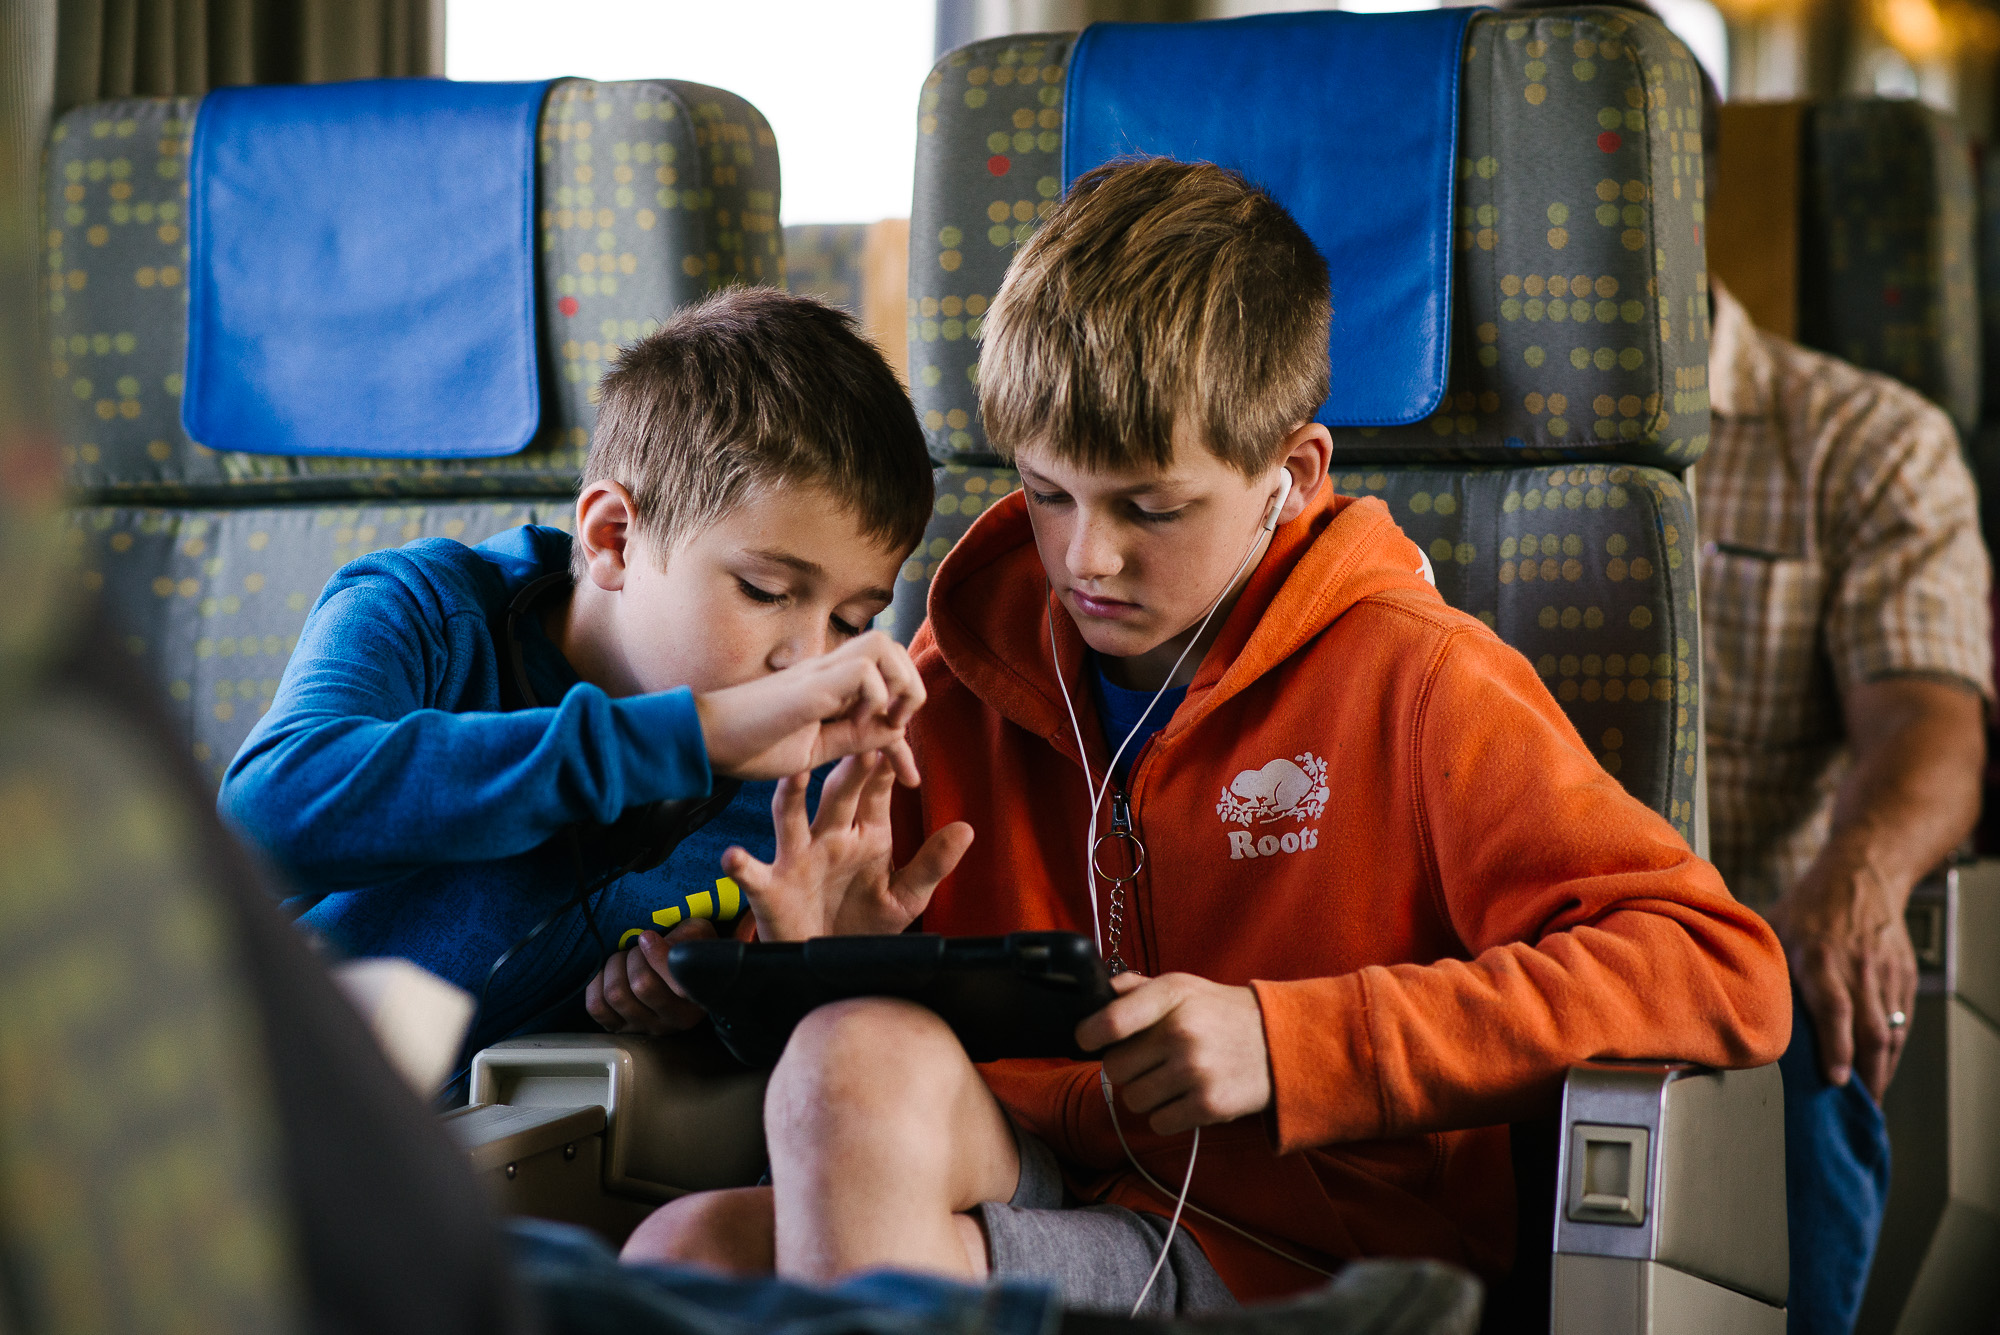 boys look at a game pad on a train